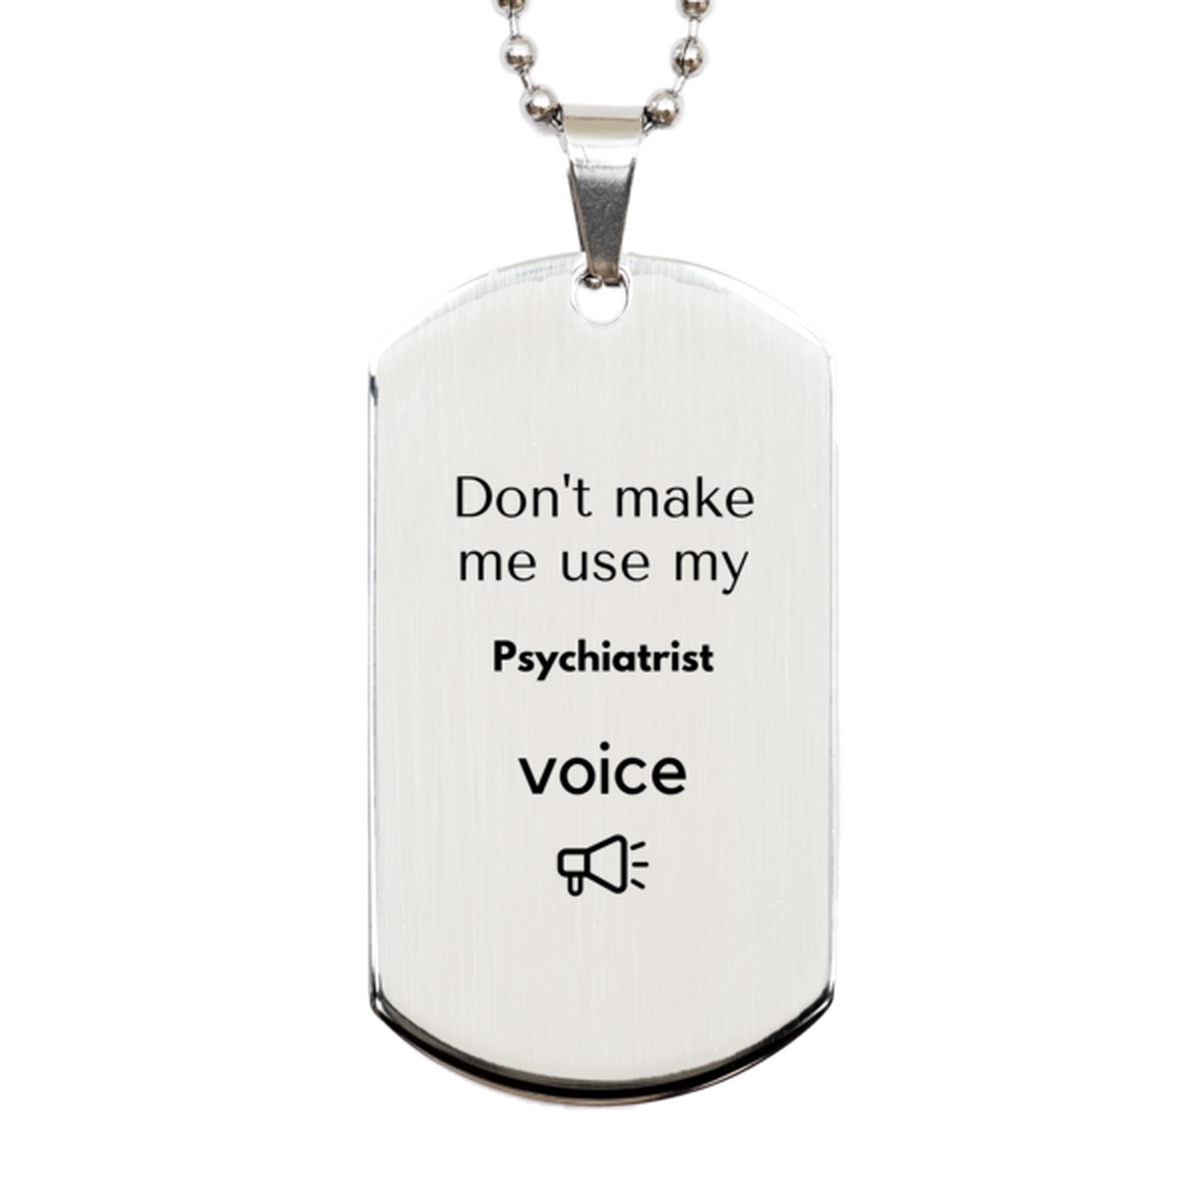 Don't make me use my Psychiatrist voice, Sarcasm Psychiatrist Gifts, Christmas Psychiatrist Silver Dog Tag Birthday Unique Gifts For Psychiatrist Coworkers, Men, Women, Colleague, Friends